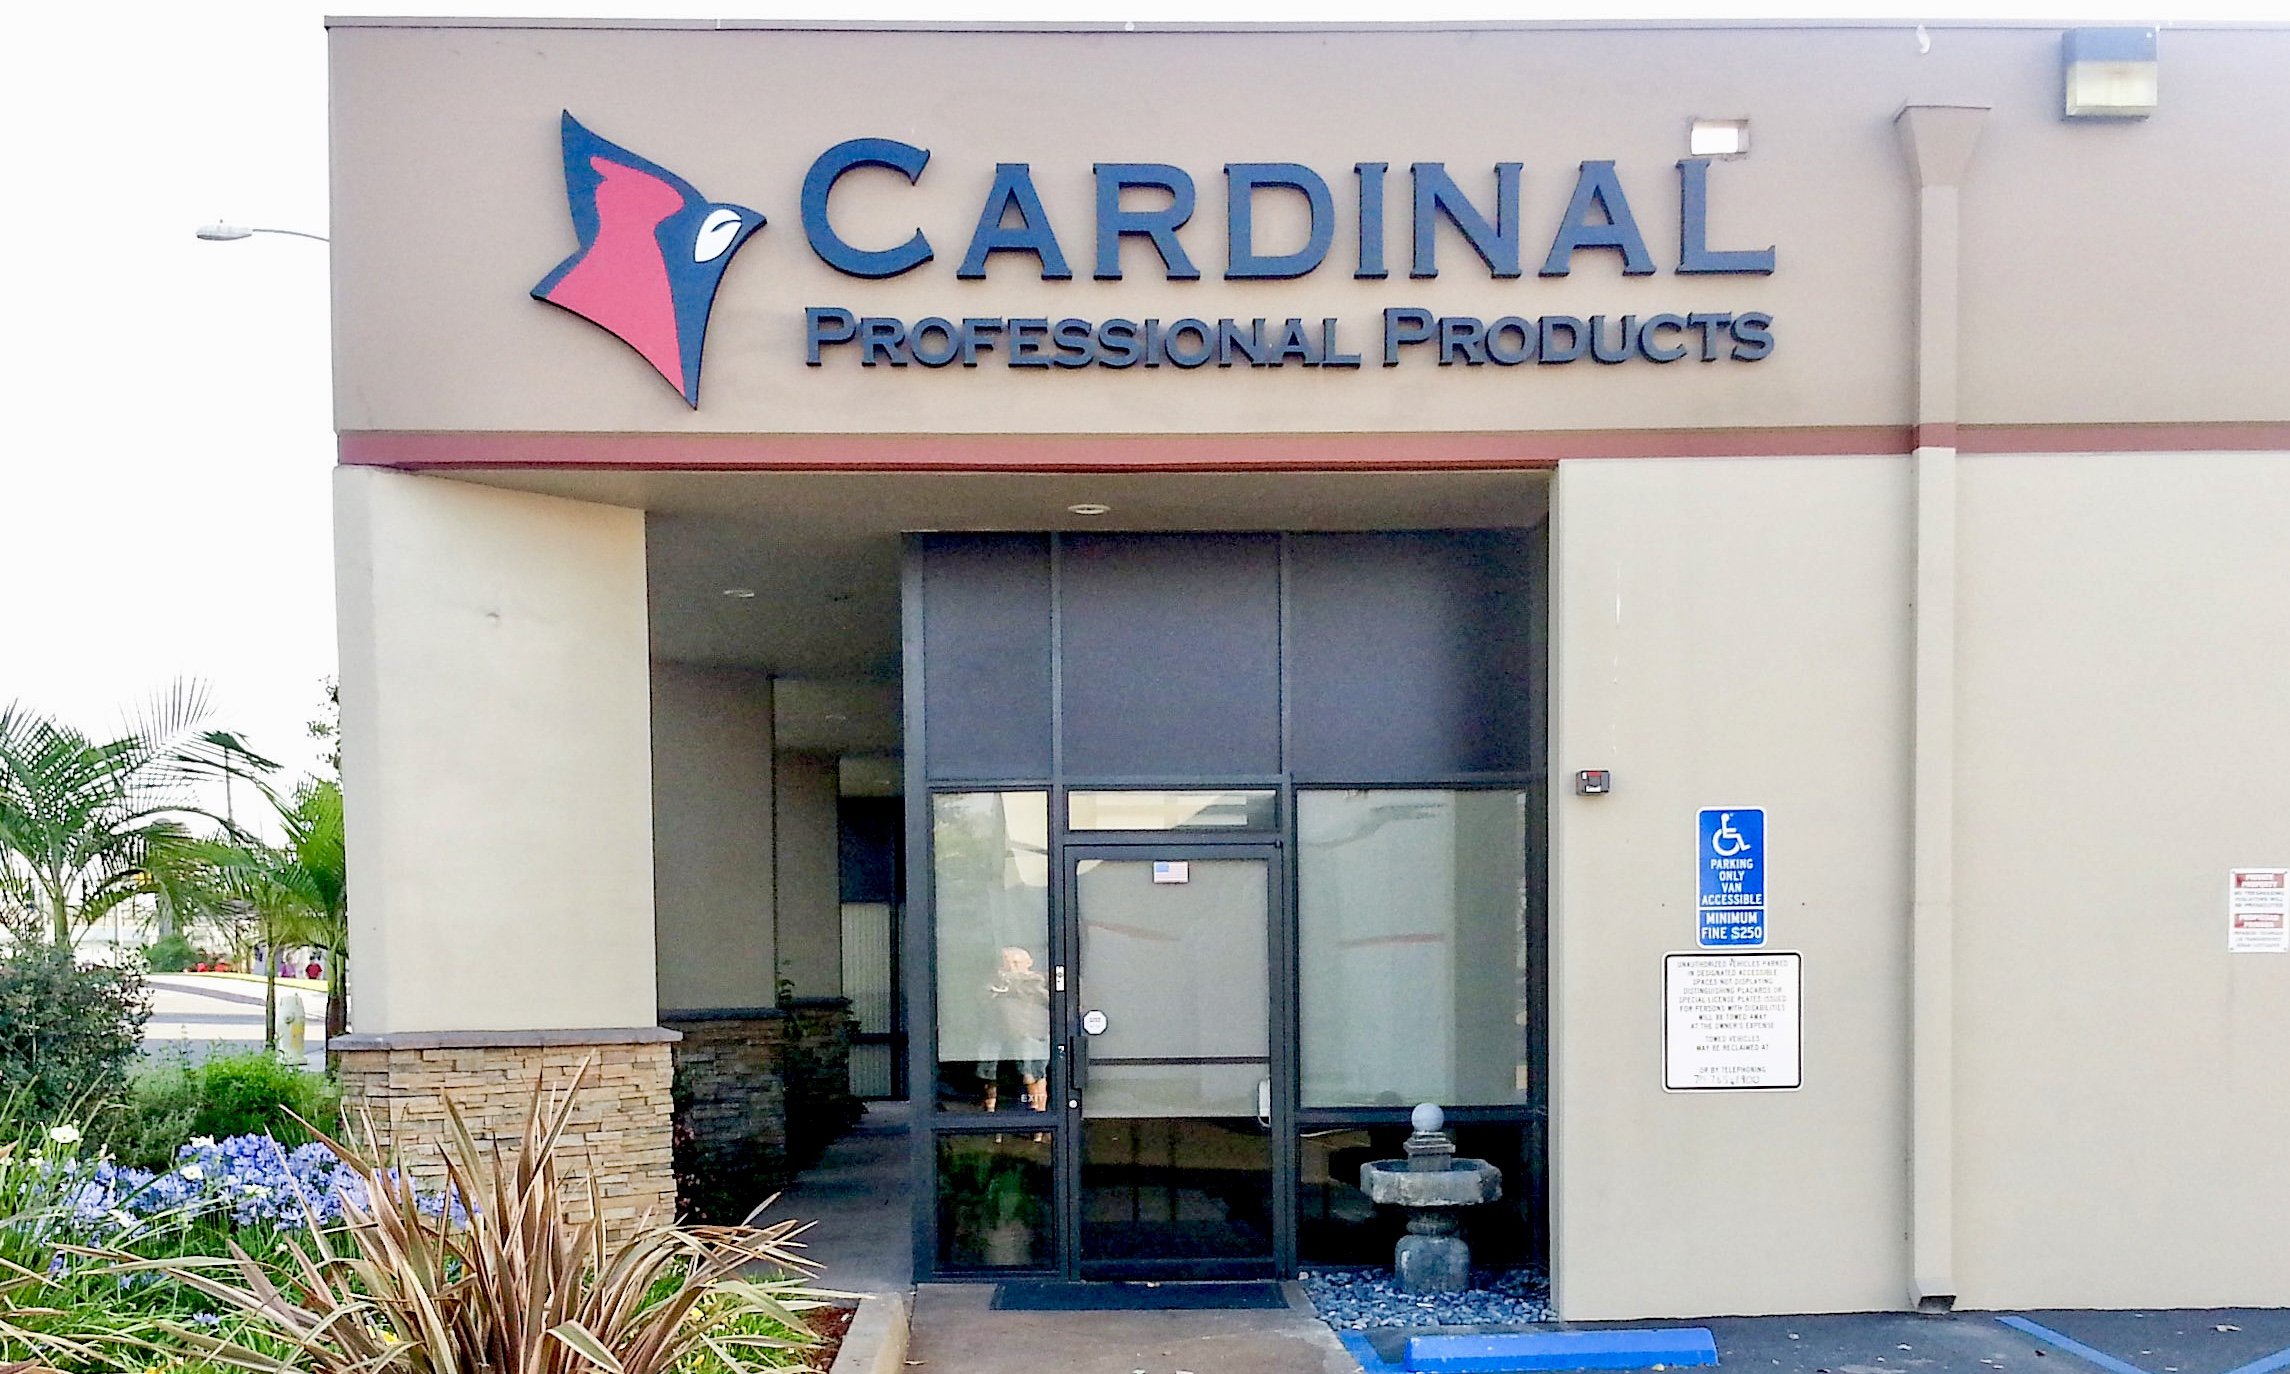 Cardinal Professional Products dimensional letters and logo sign